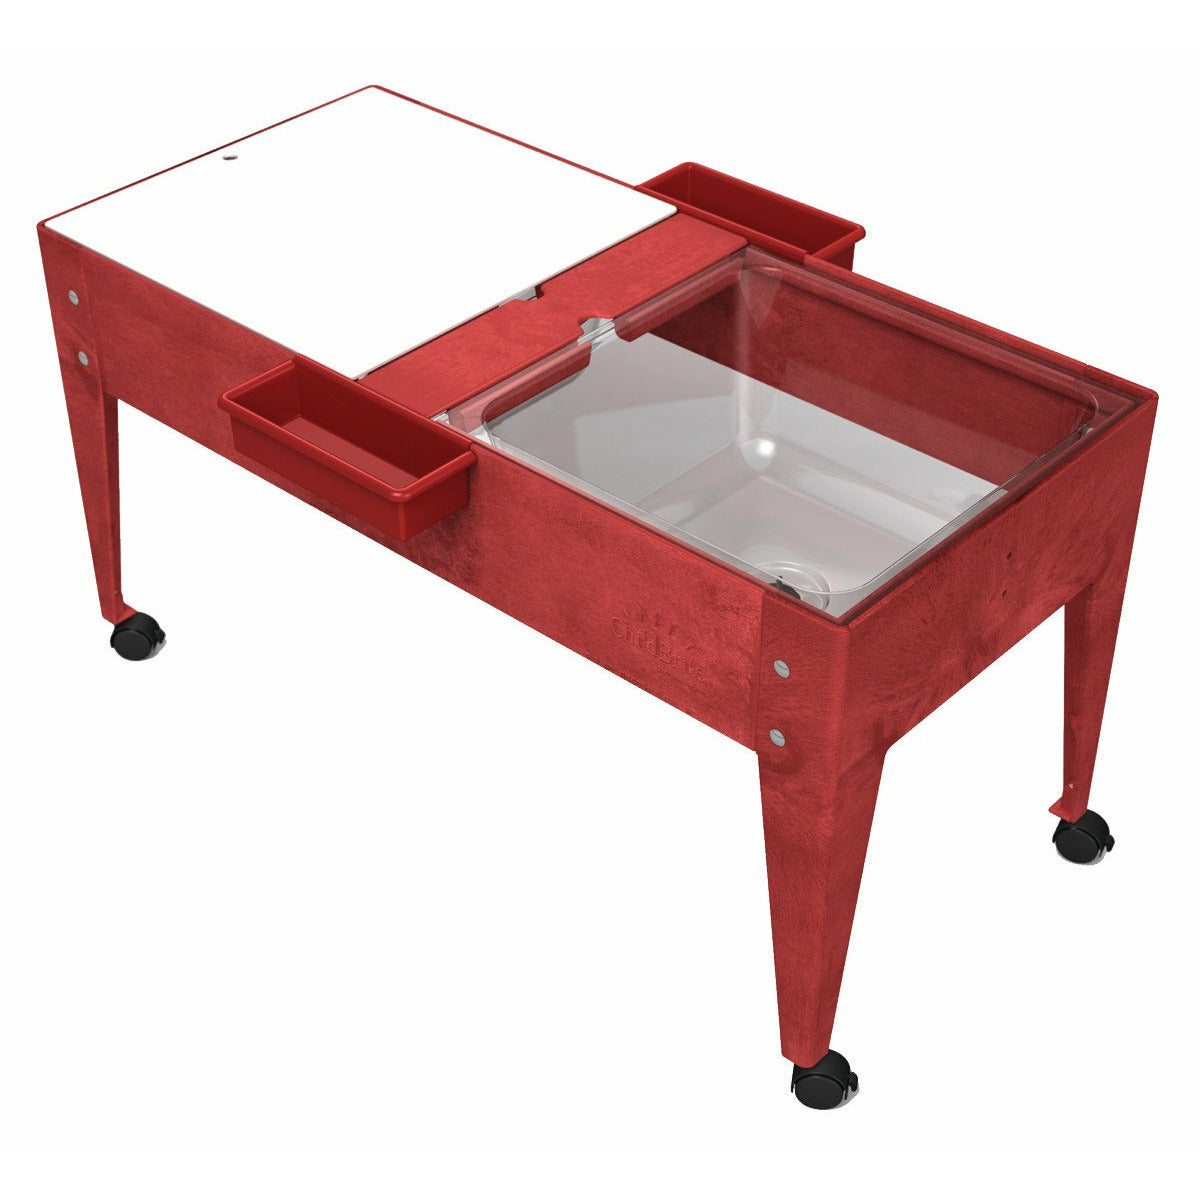 Double Mite Activity Table